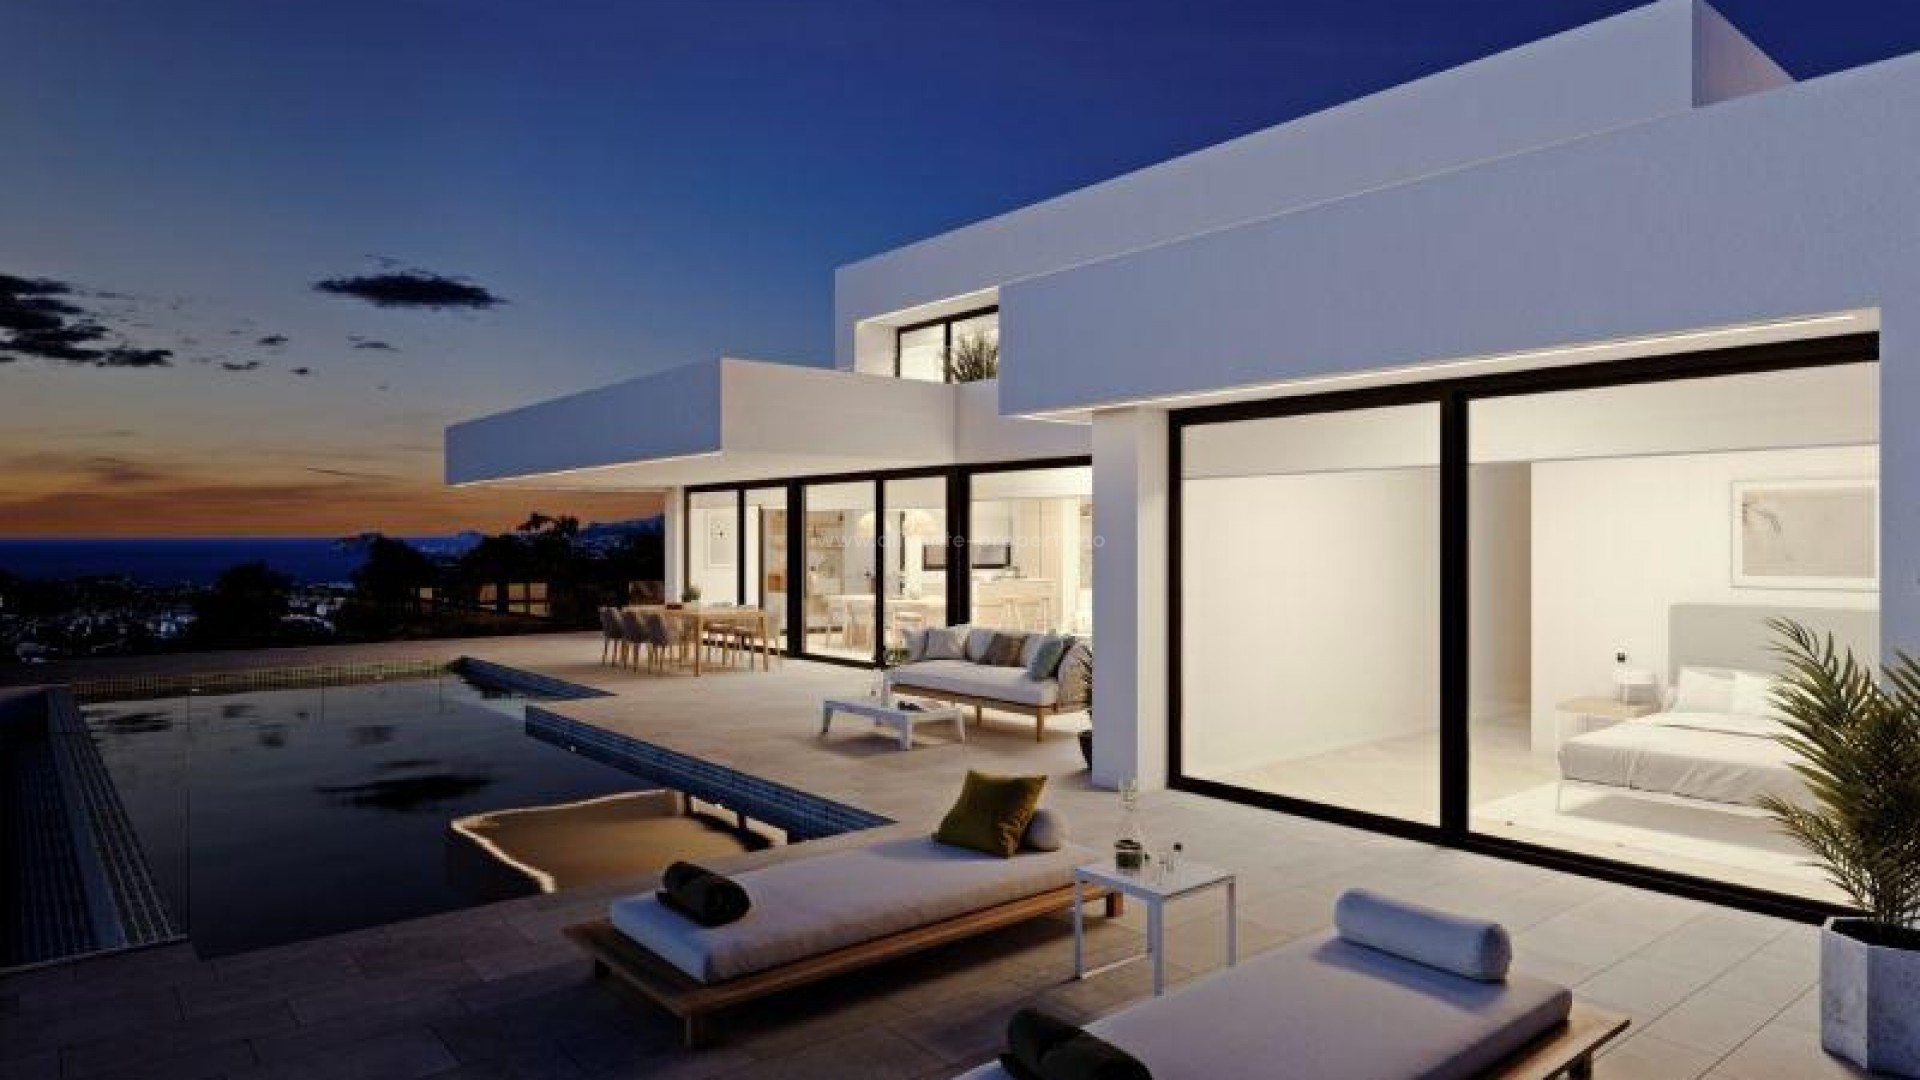 Modern luxury villa in Benitachell (Cumbres del Sol) with 4 bedrooms, 5 bathrooms, the main rooms are connected to the outside, with the pool terrace and veranda